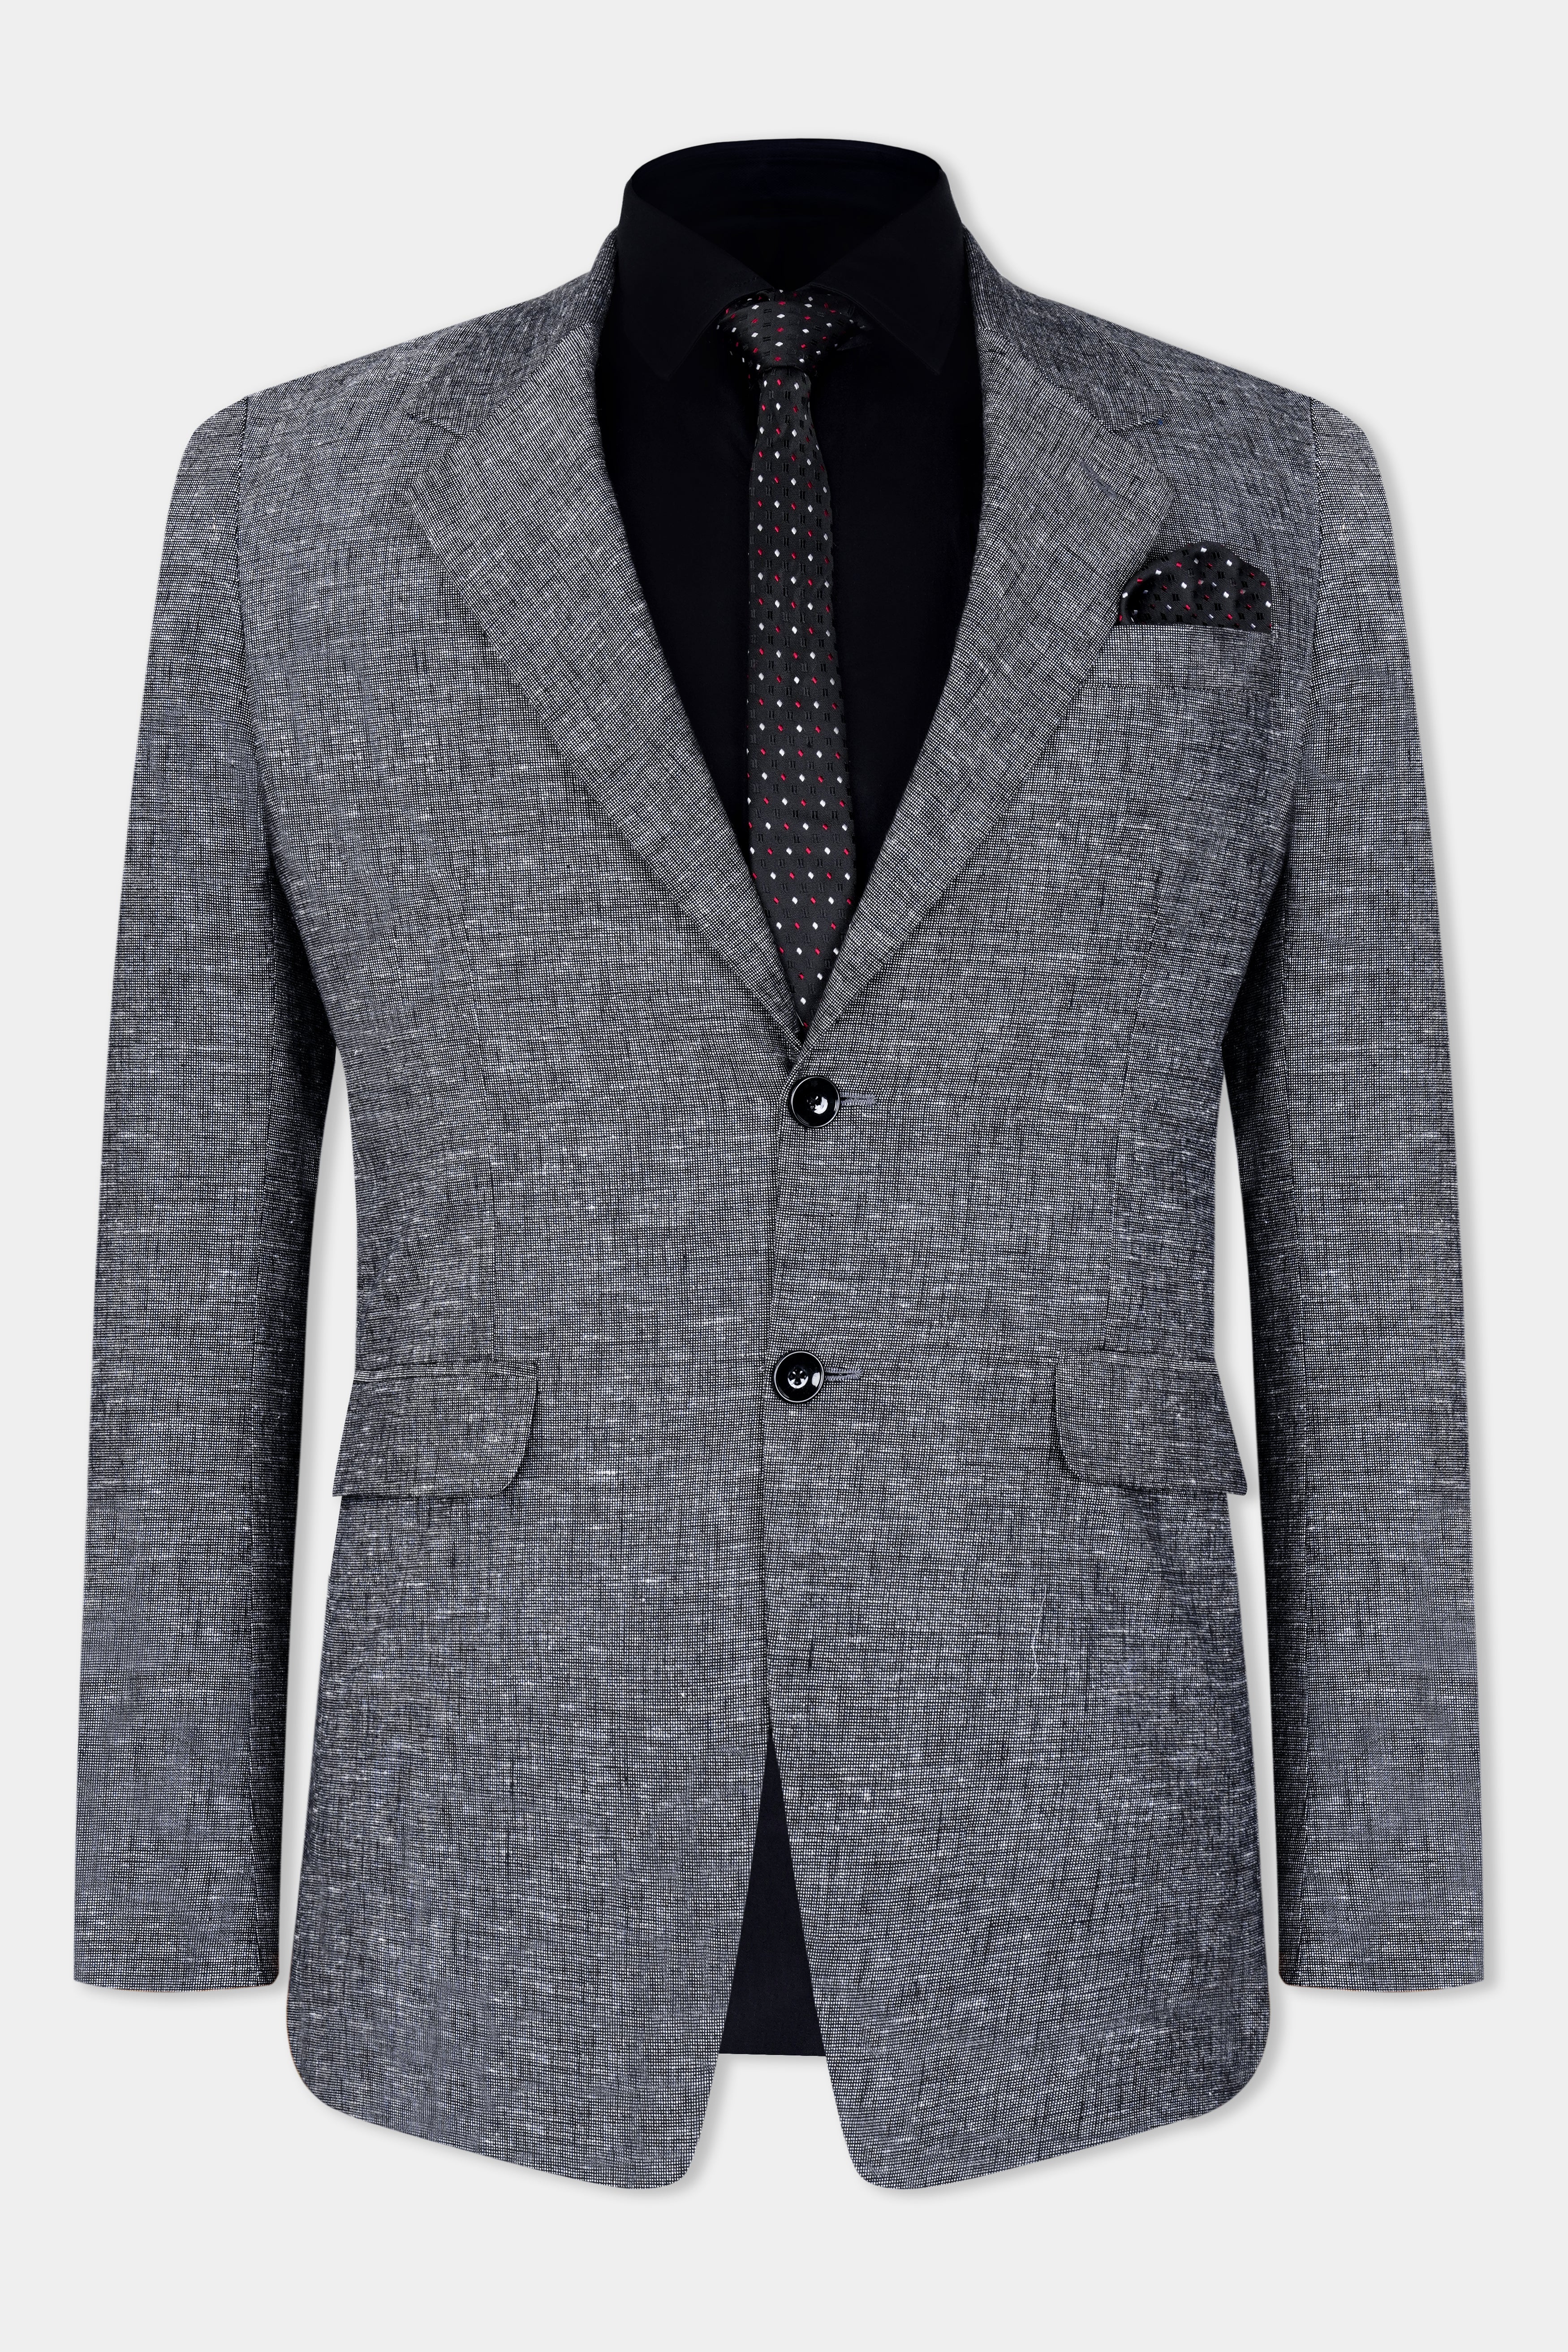 Dim Gray Luxurious Linen Single Breasted Blazer BL2923-SB-36, BL2923-SB-38, BL2923-SB-40, BL2923-SB-42, BL2923-SB-44, BL2923-SB-46, BL2923-SB-48, BL2923-SB-50, BL2923-SB-52, BL2923-SB-54, BL2923-SB-56, BL2923-SB-58, BL2923-SB-60